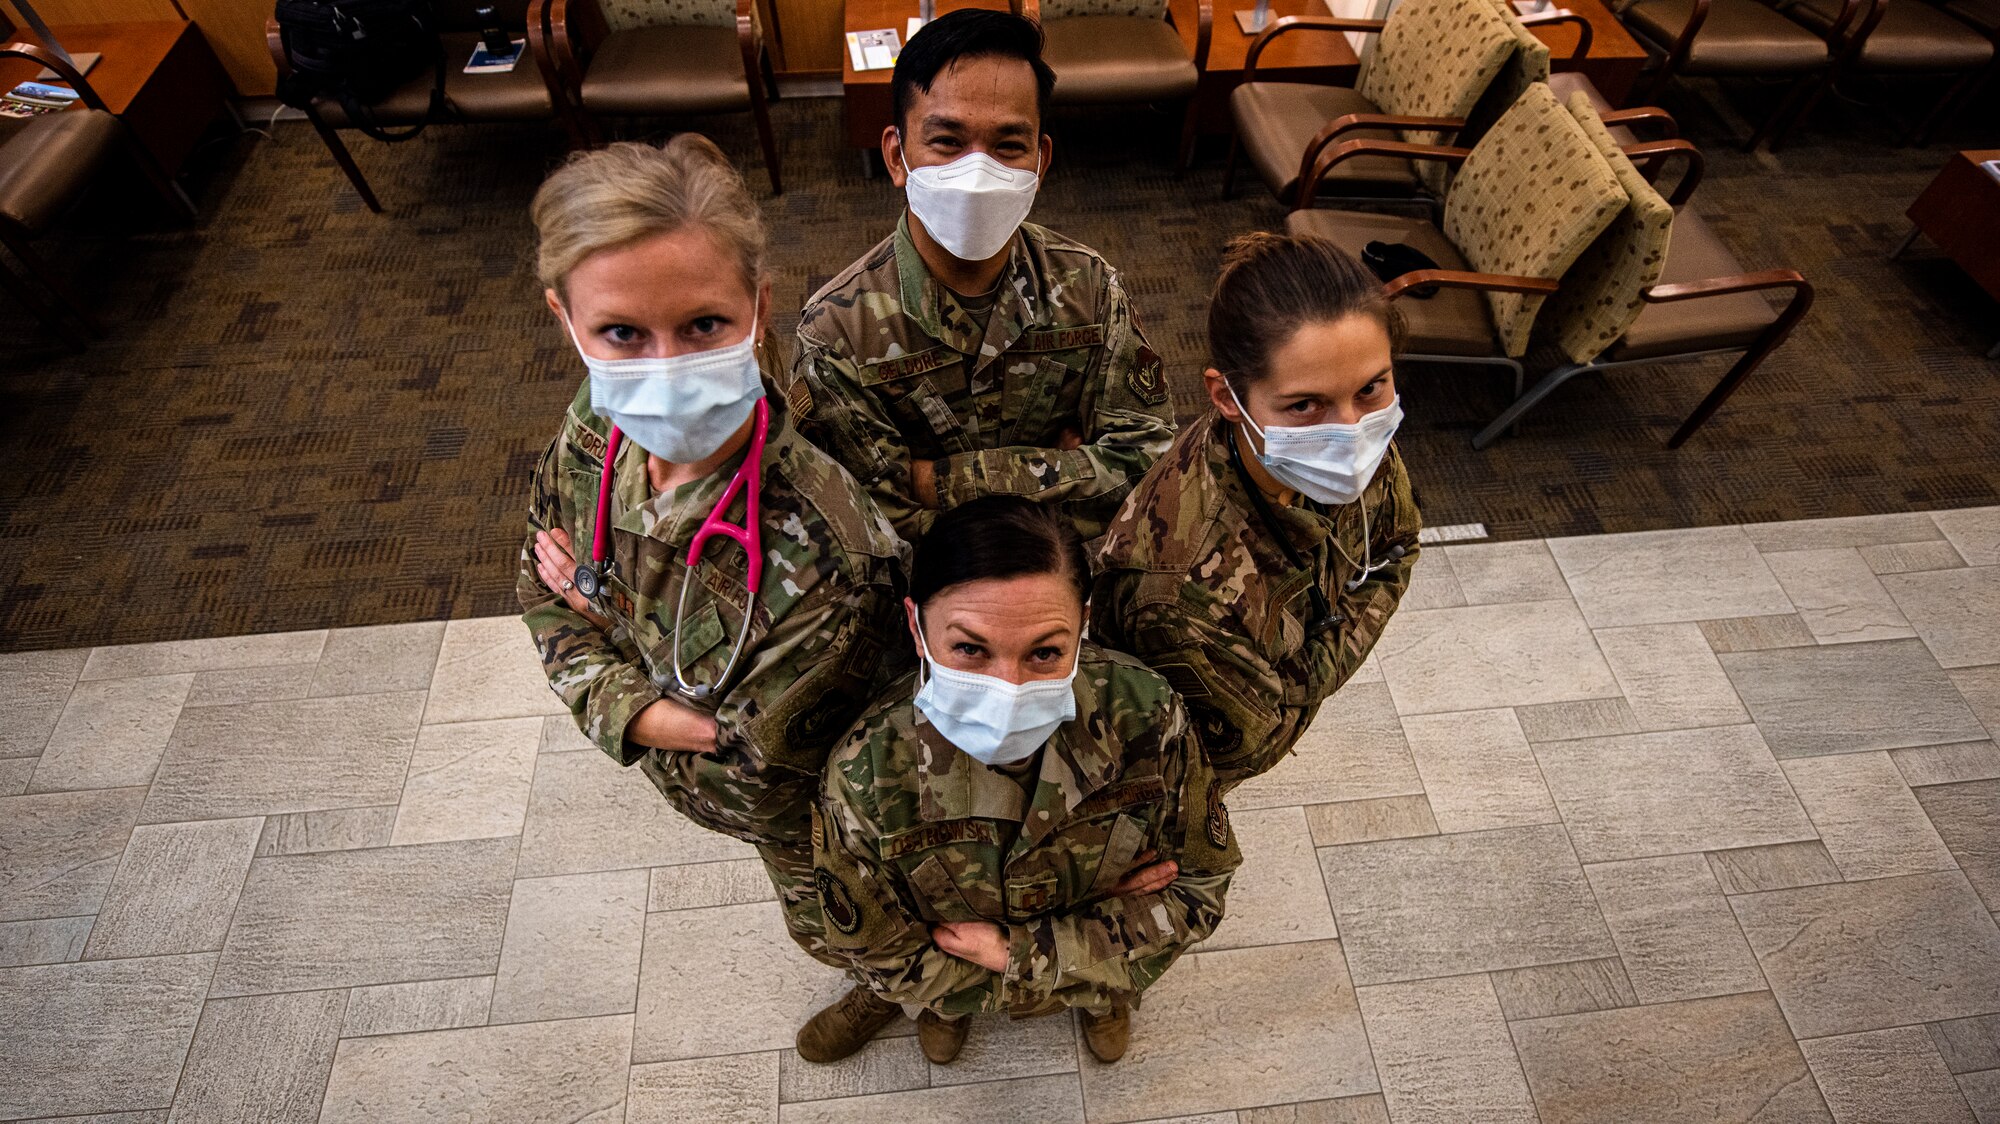 A group of physician assistants stand ready